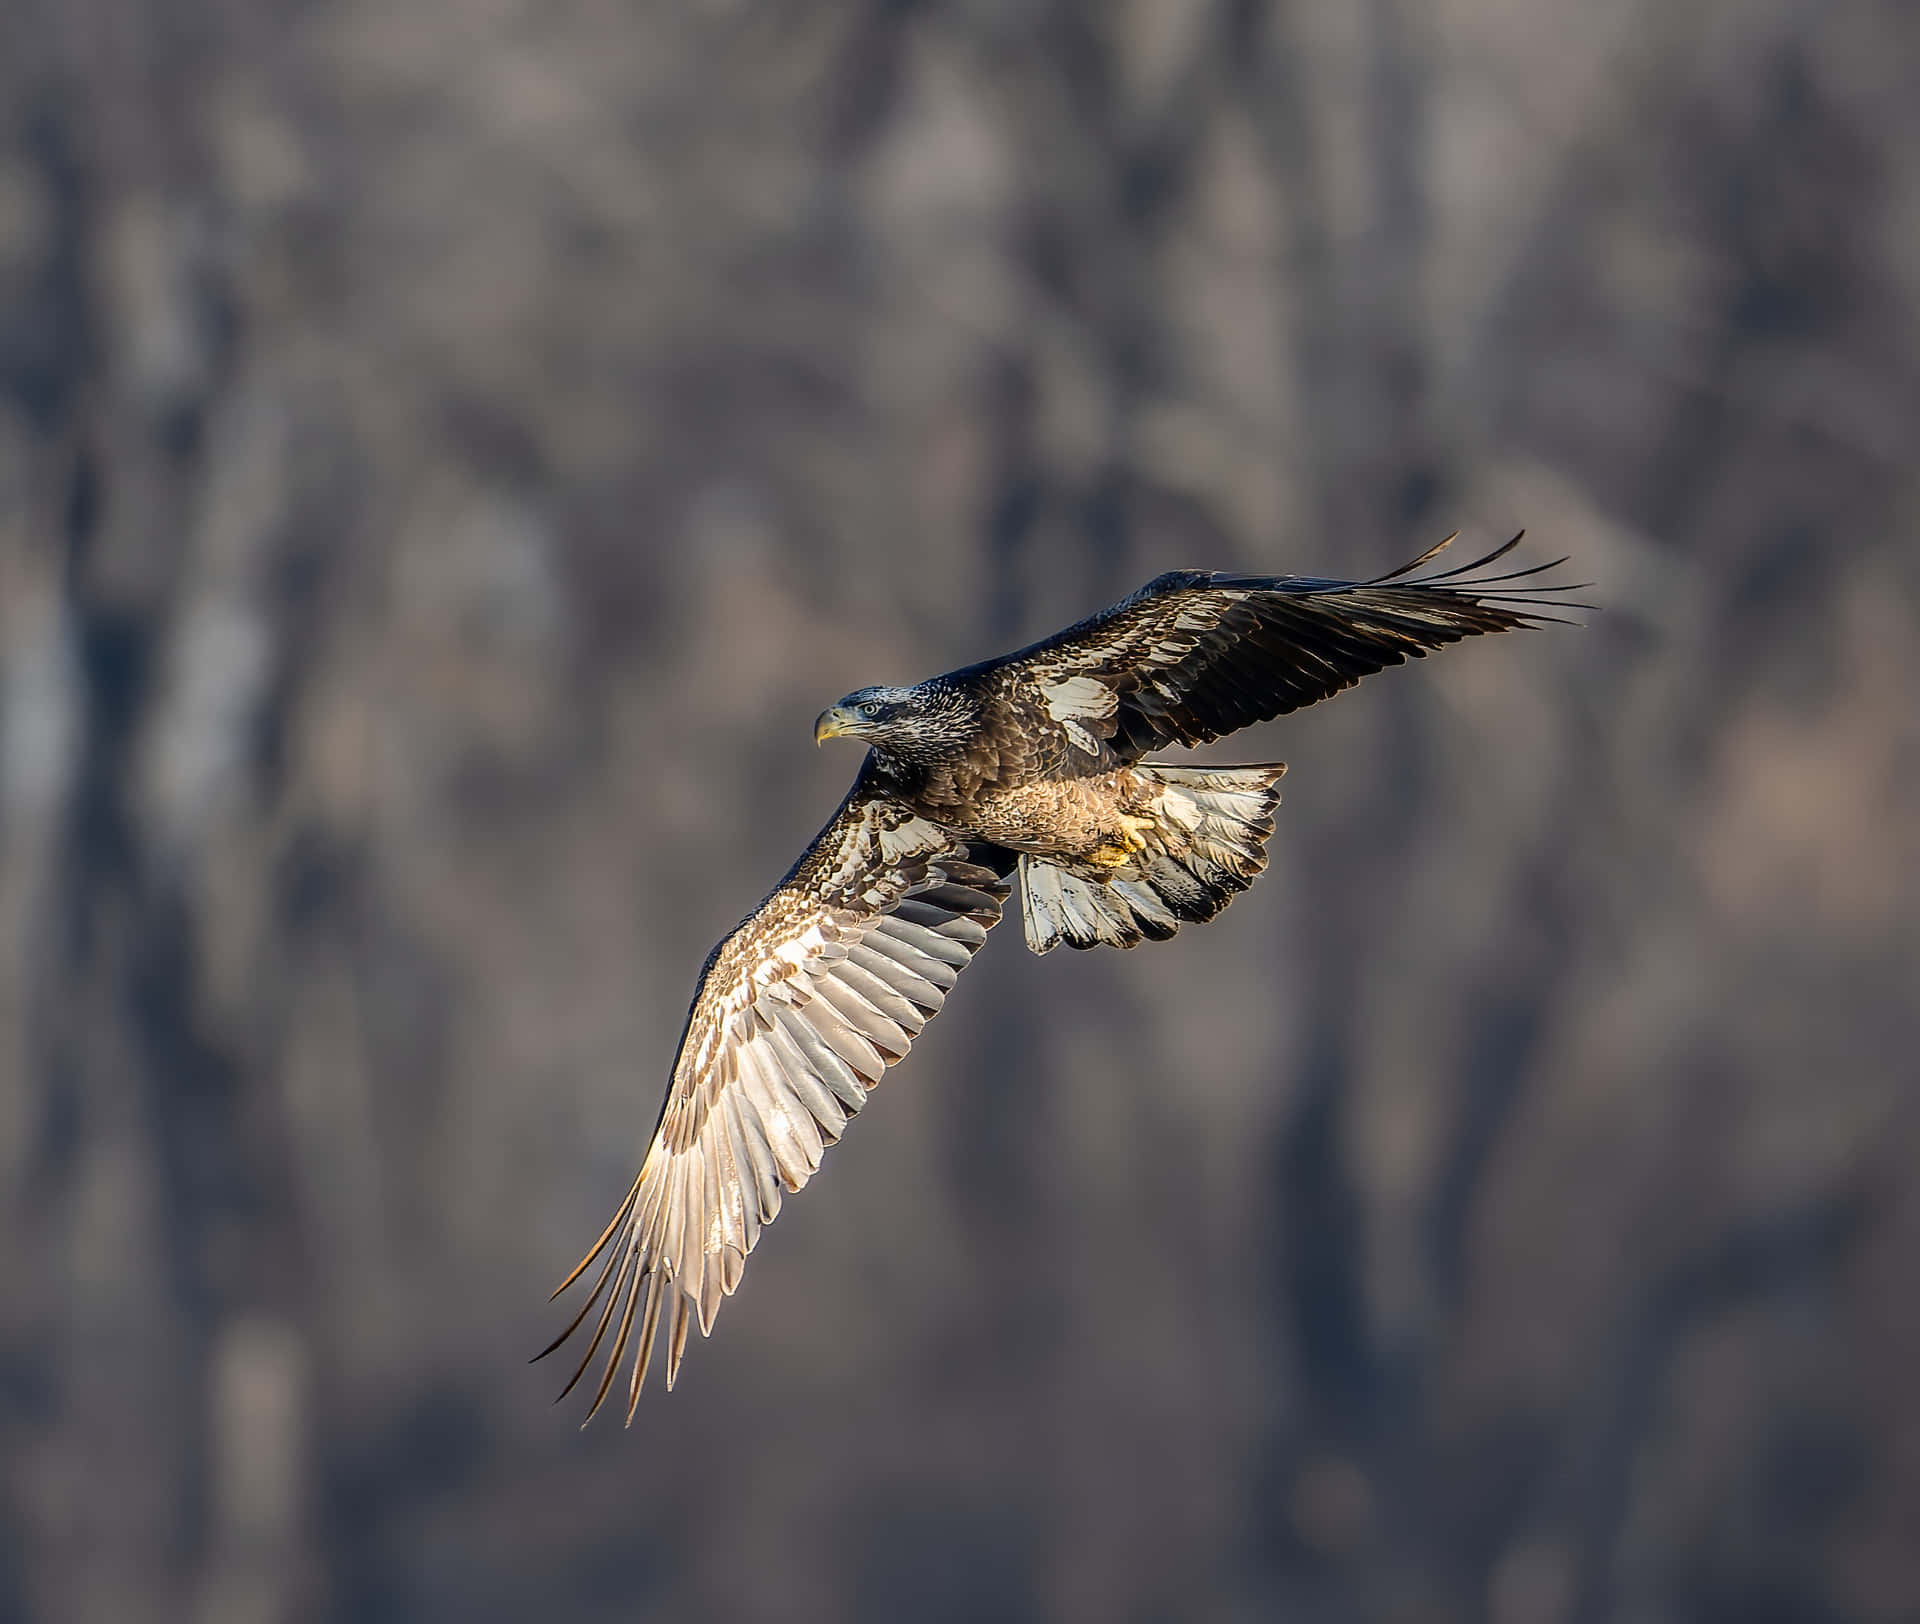 A young eagle takes flight, searching for its next adventure